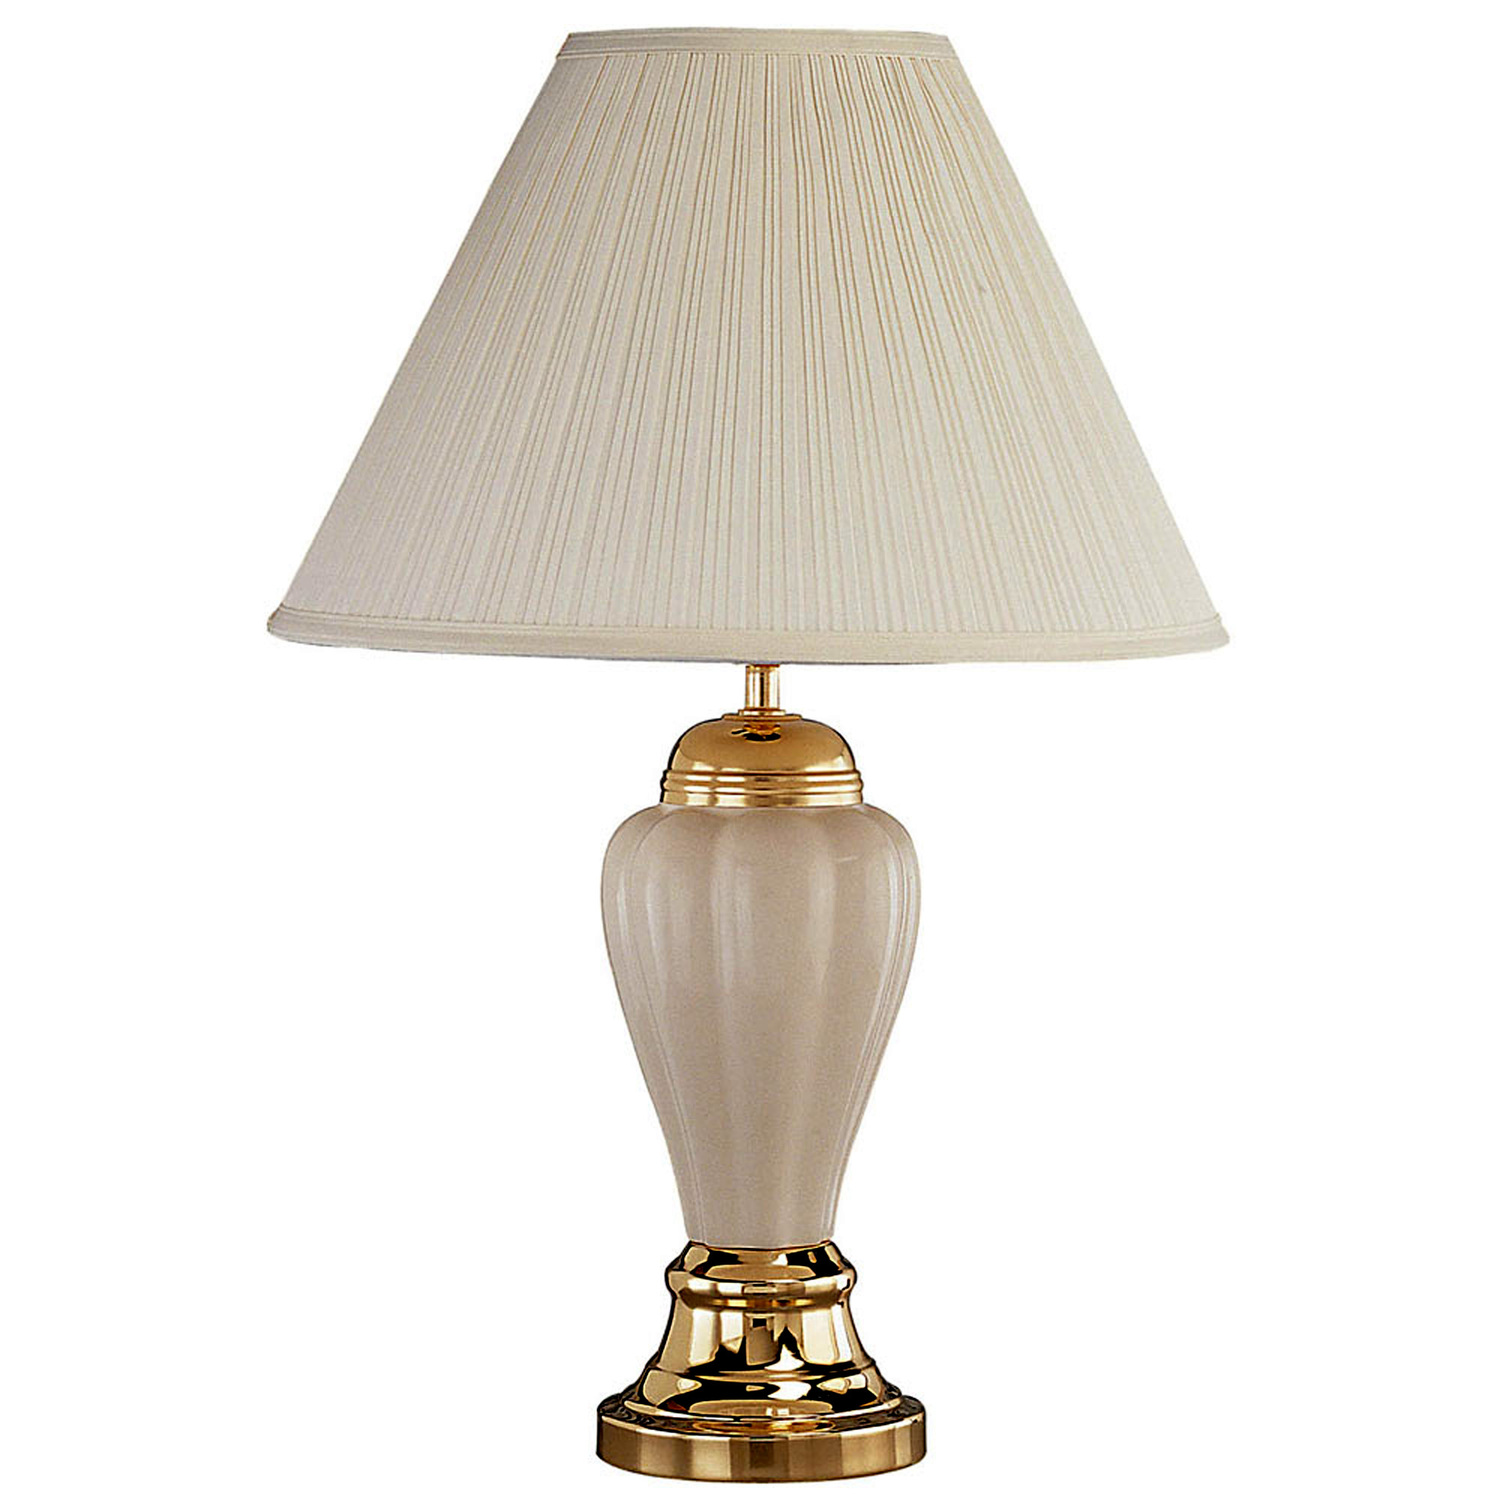 ORE International 27" Urn-Shaped Ceramic Table Lamp with Linen Shade in Ivory - image 1 of 2